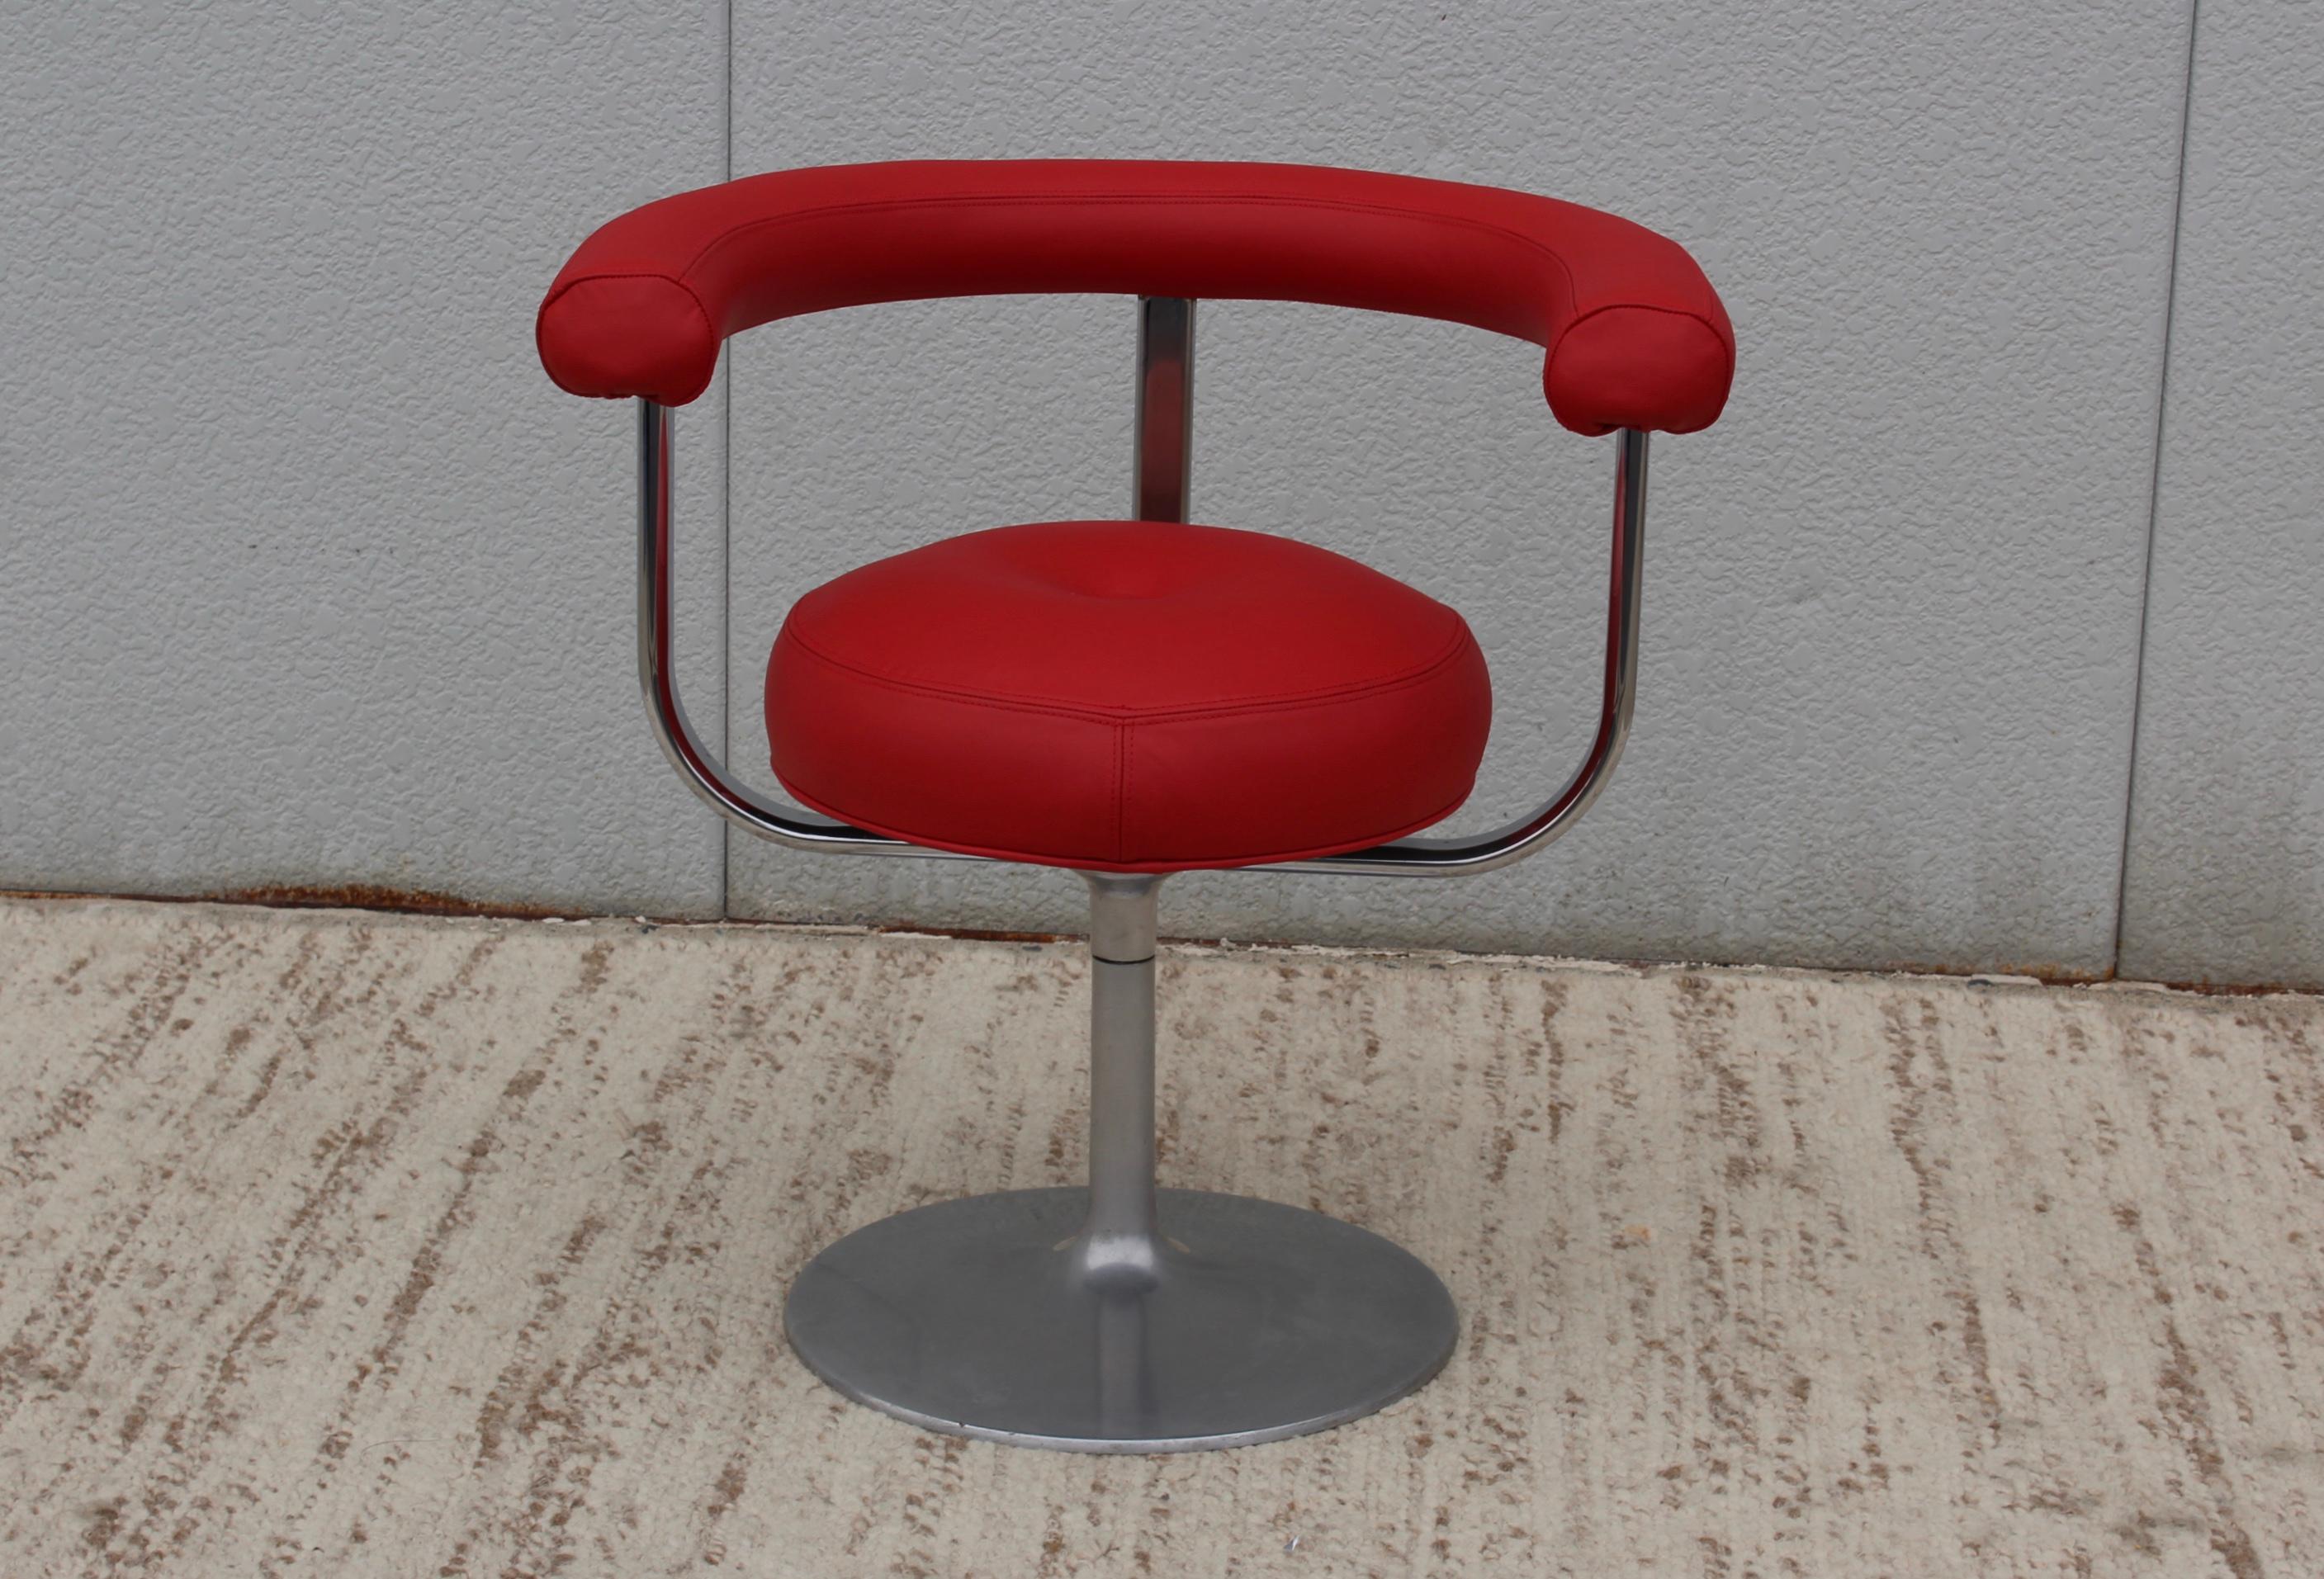 1960s Mid-Century Modern desk leather chair designed by Esko Pajamies for Lepo Finland. In good vintage condition with minor wear and patina to the chrome. Newly reupholstered in red leather.